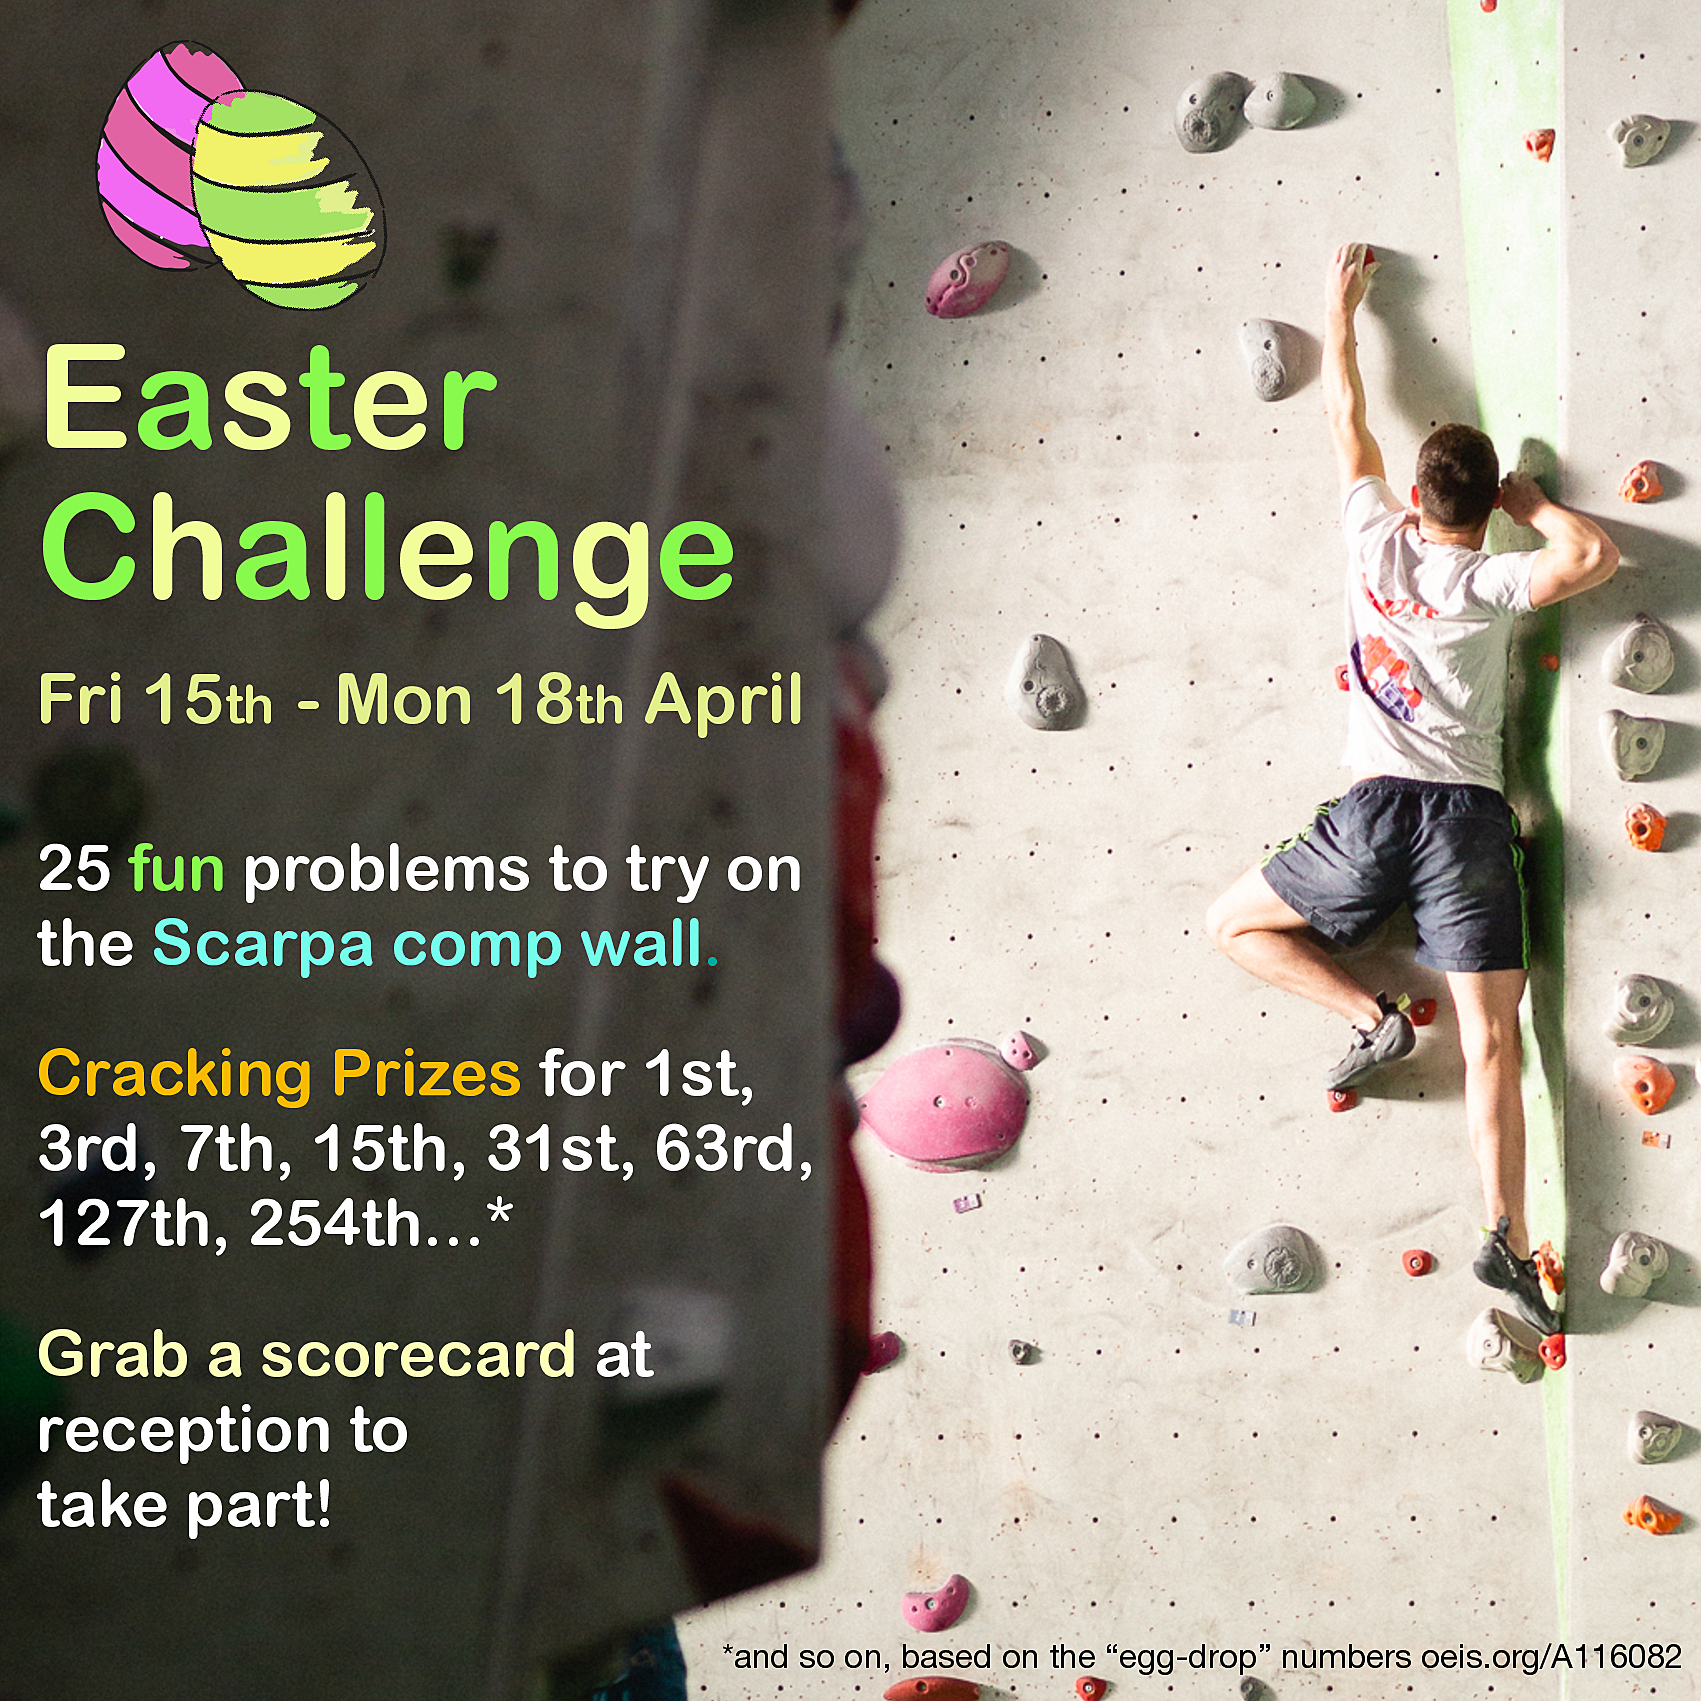 The Easter Challenge